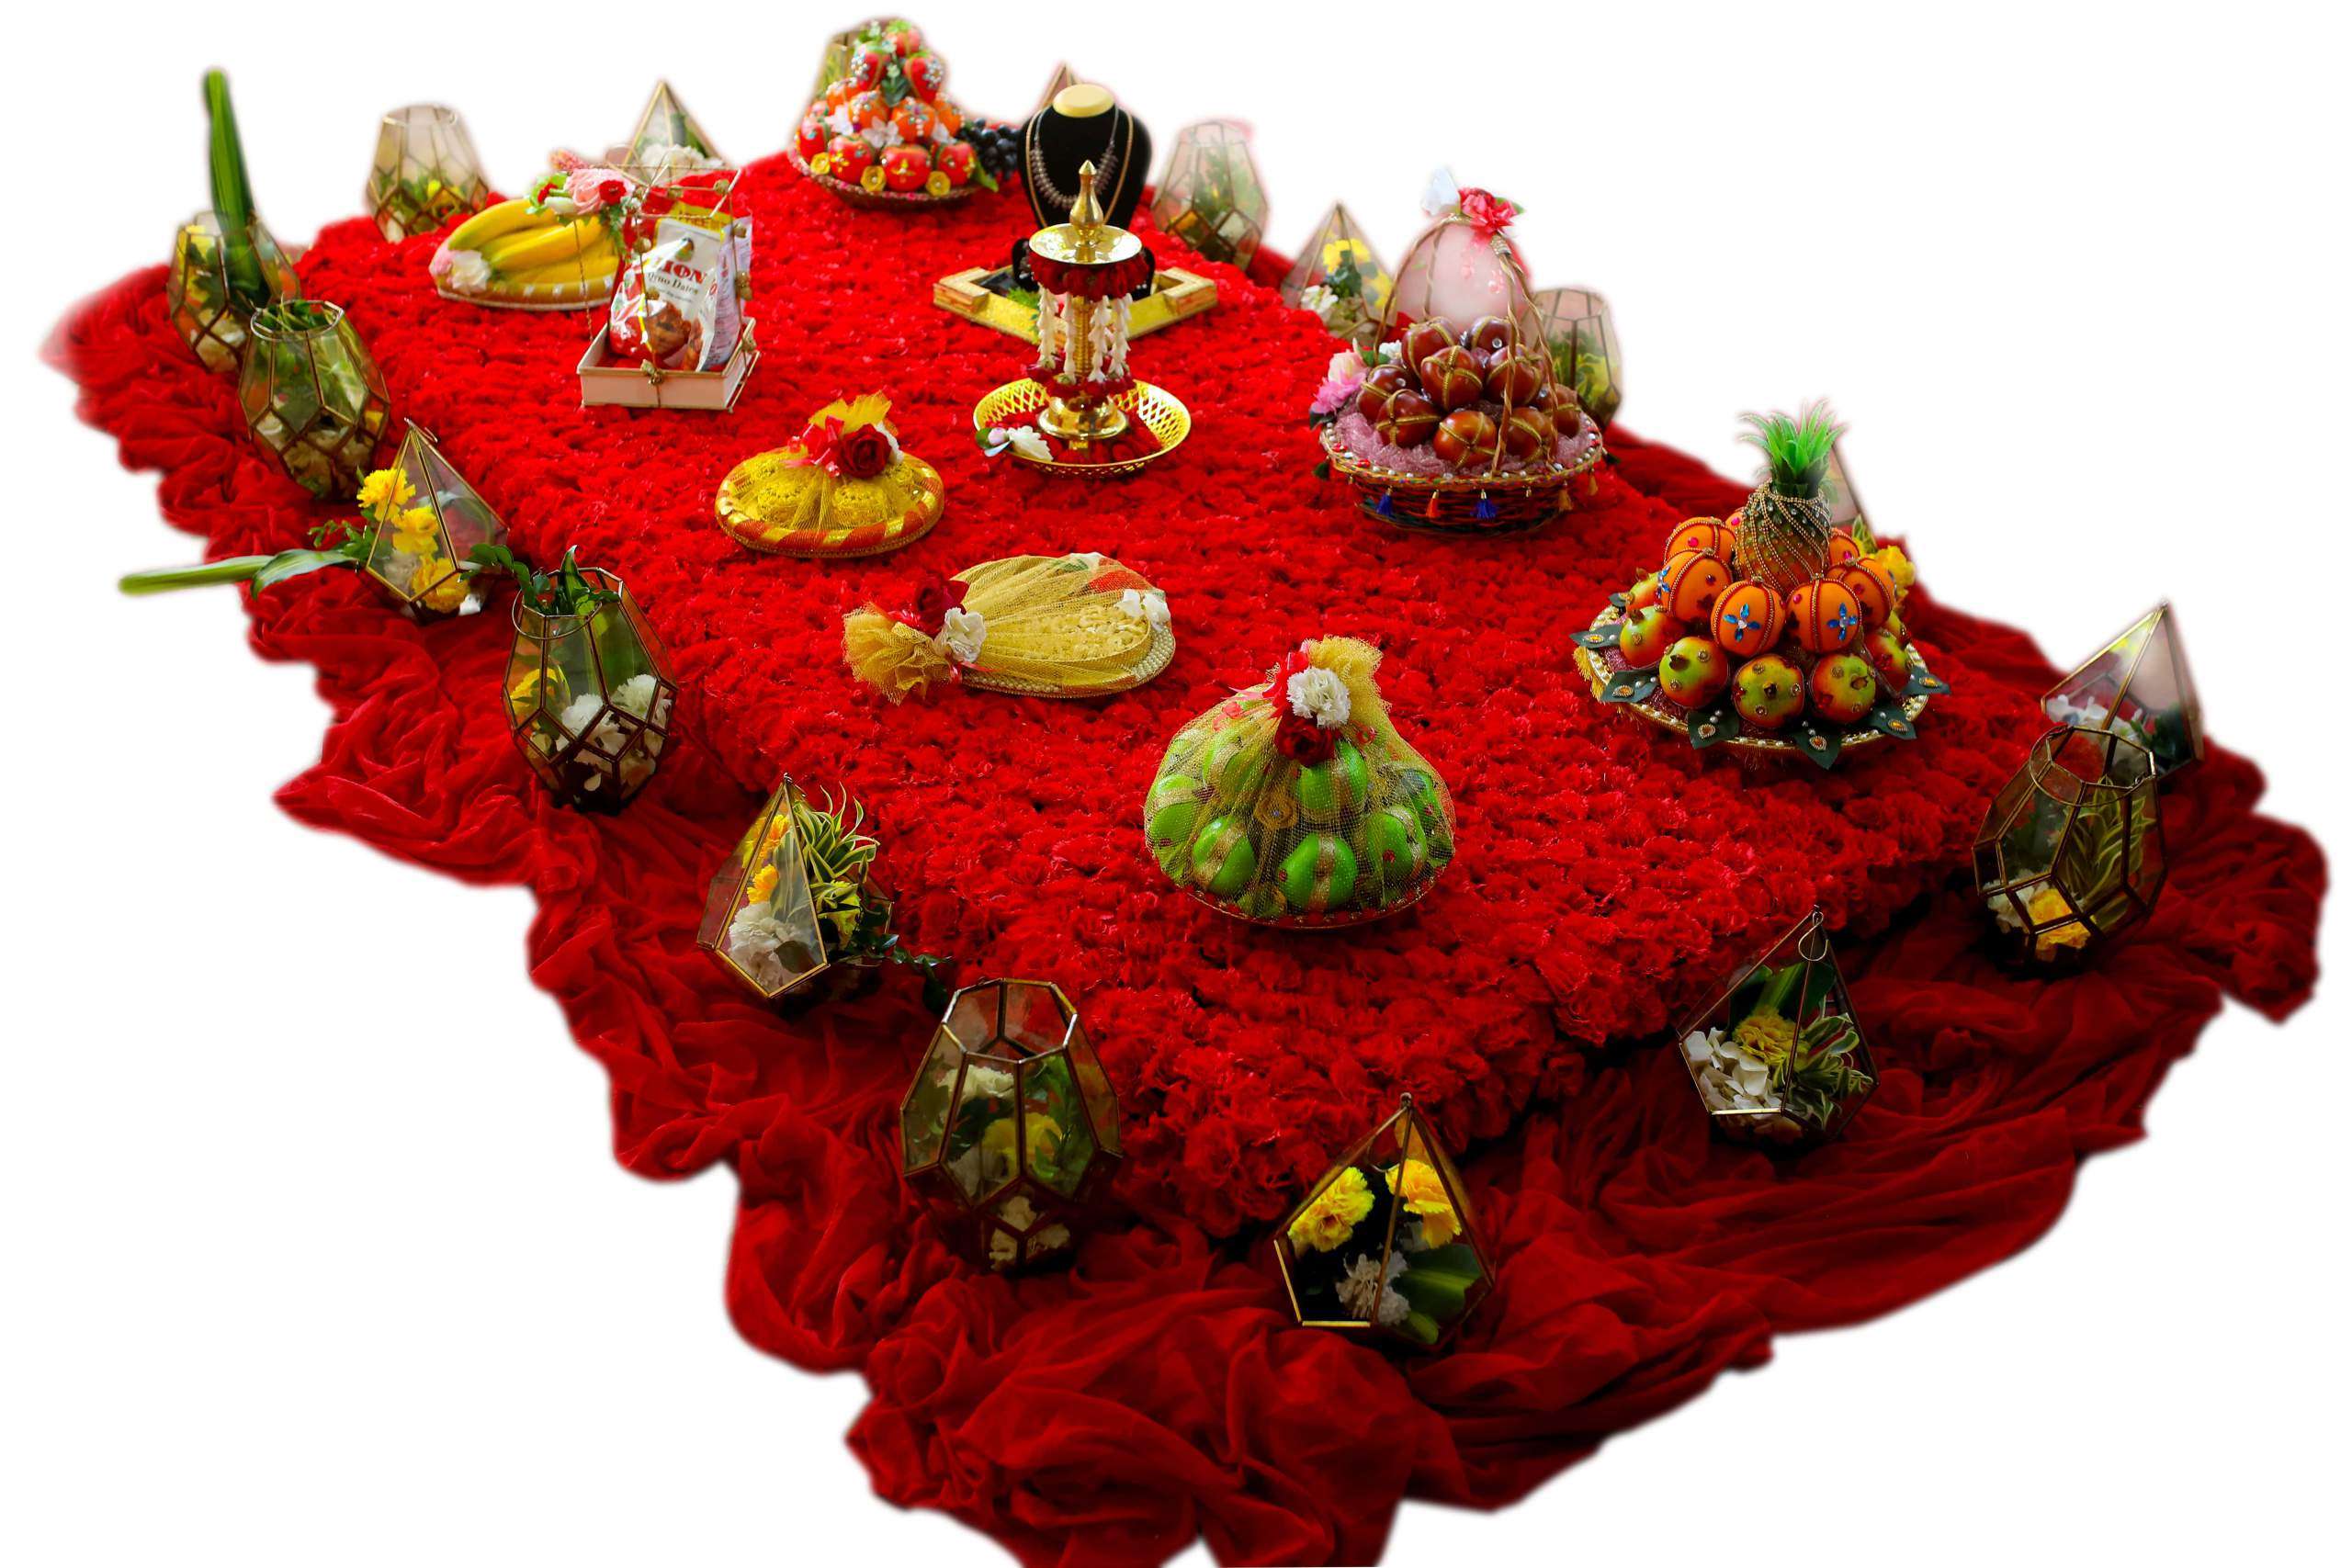 SAARTHI Rajasthani Decorative Handmade Traditional Multicolour Attractive  Auspicious Lucky Multipurpose Spiritual Polyresin God Idol on Floral Gota  Base Plate with Flowers and Artificial Coins for Pooja/ Car Dashboard /  Aarti / Bhog